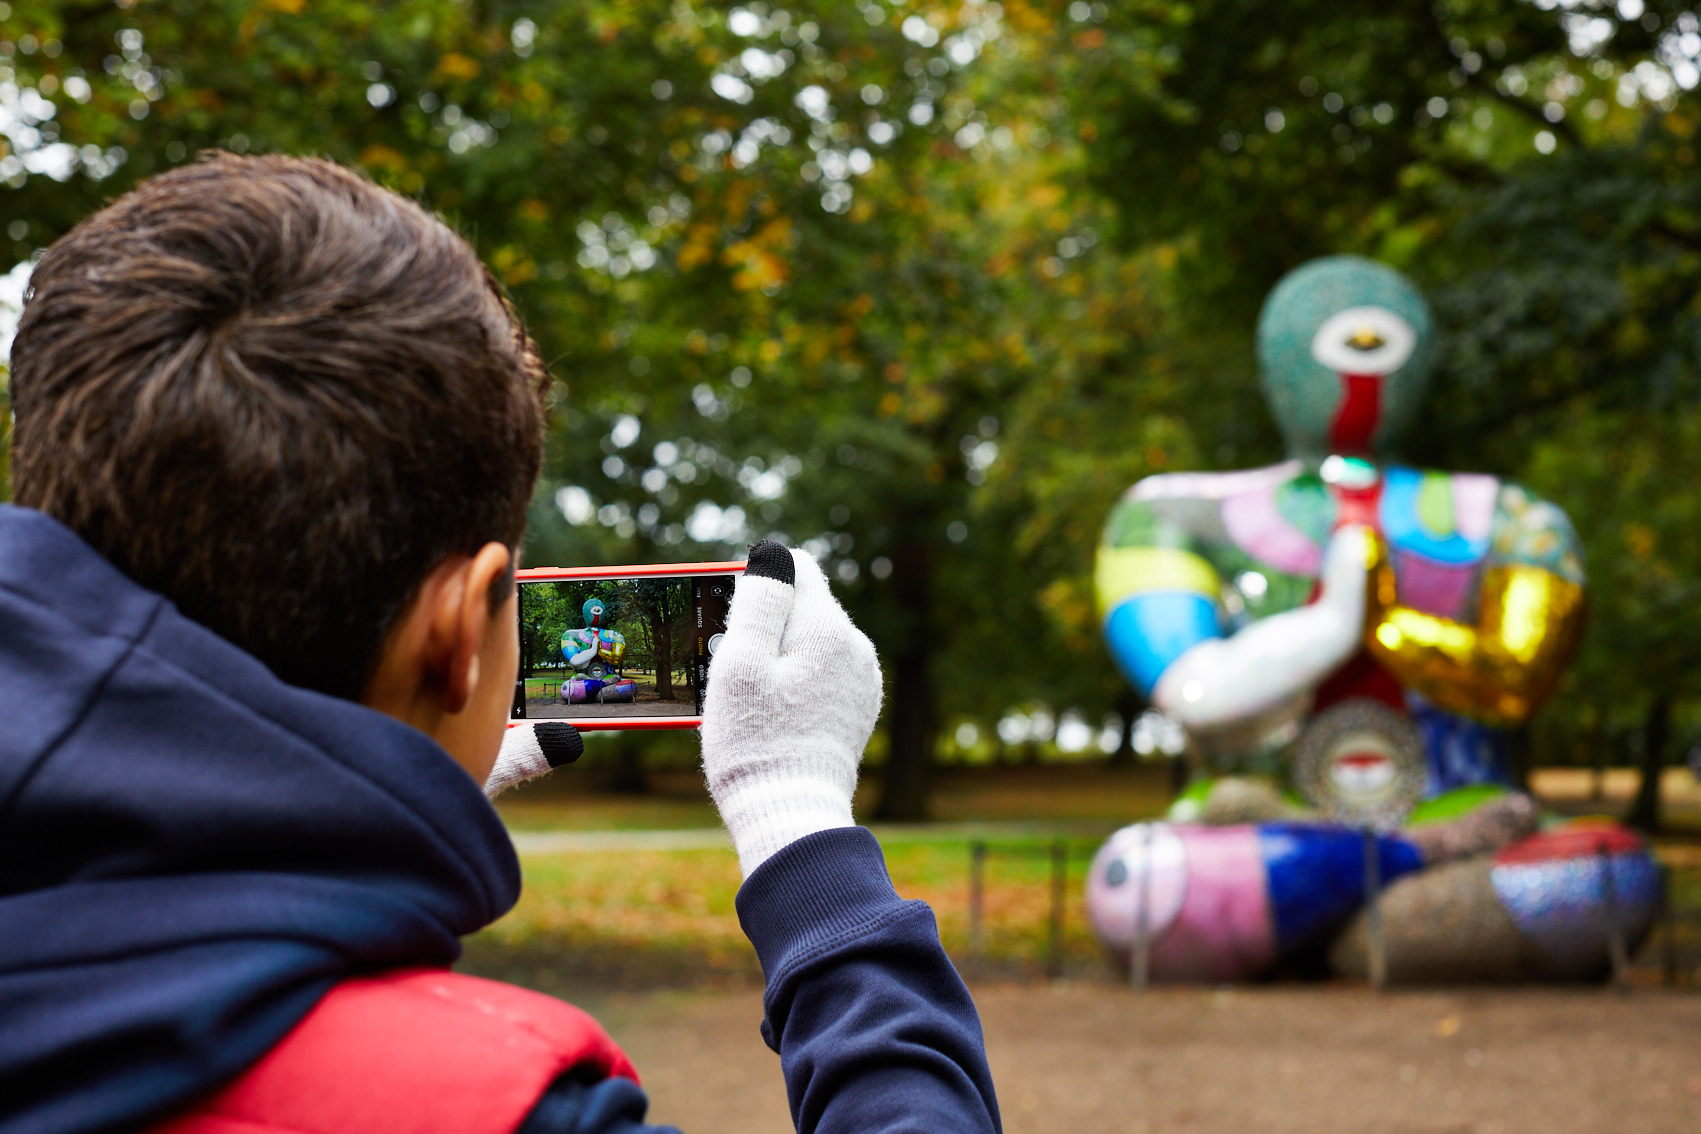 A child photographing a colourful sculpture on a mobile phone.